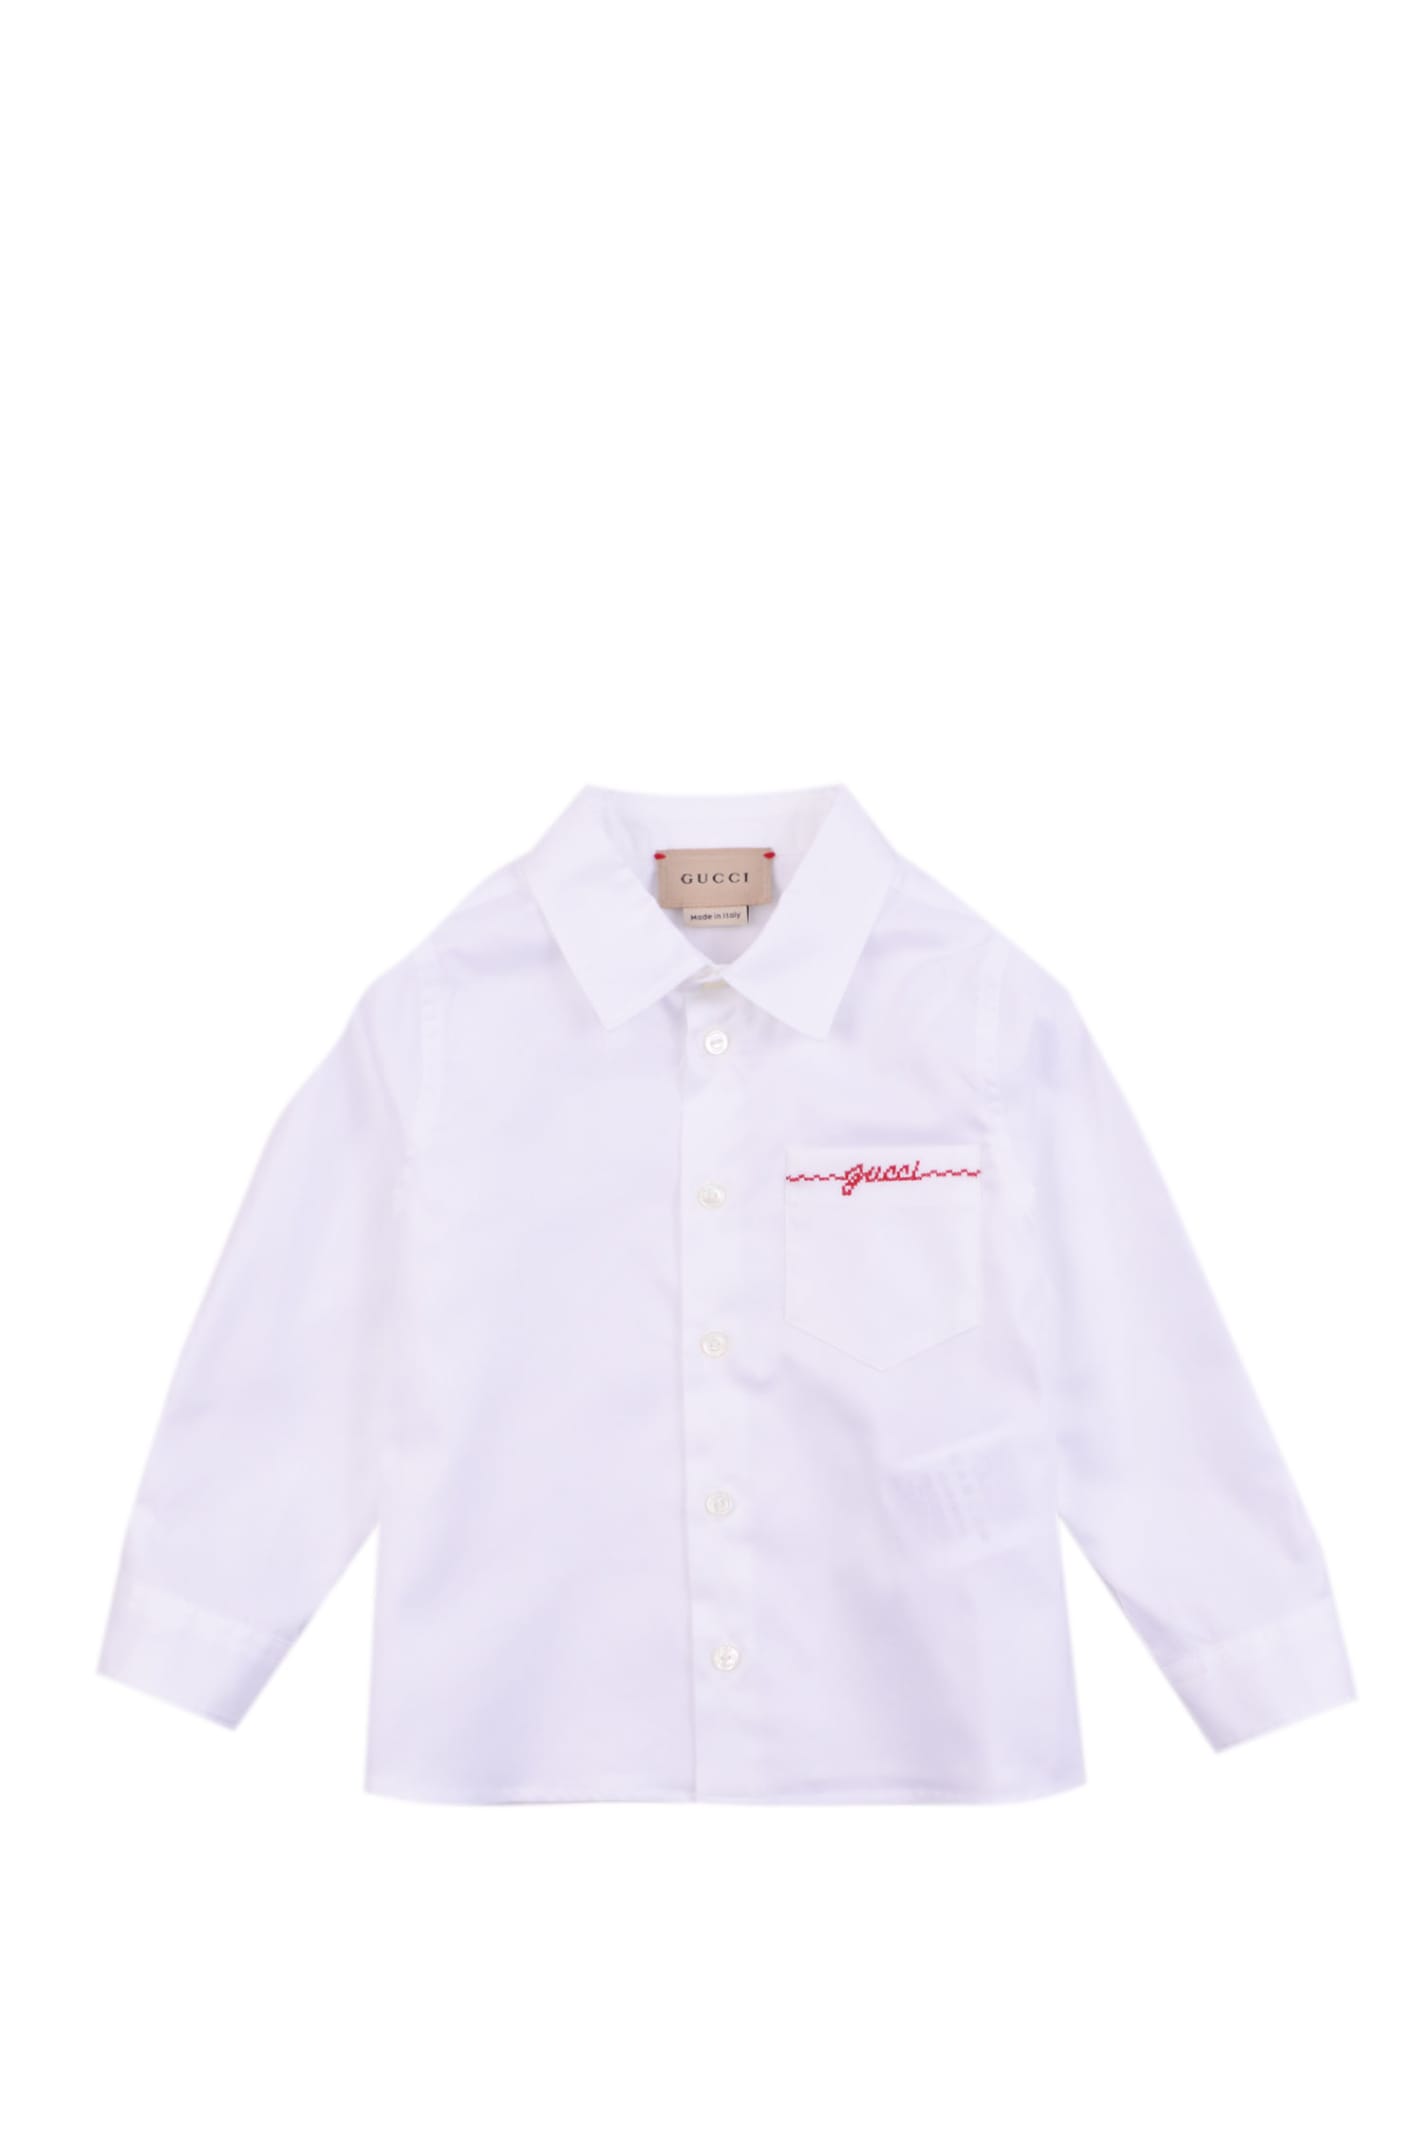 Gucci Babies' Cotton Shirt In White